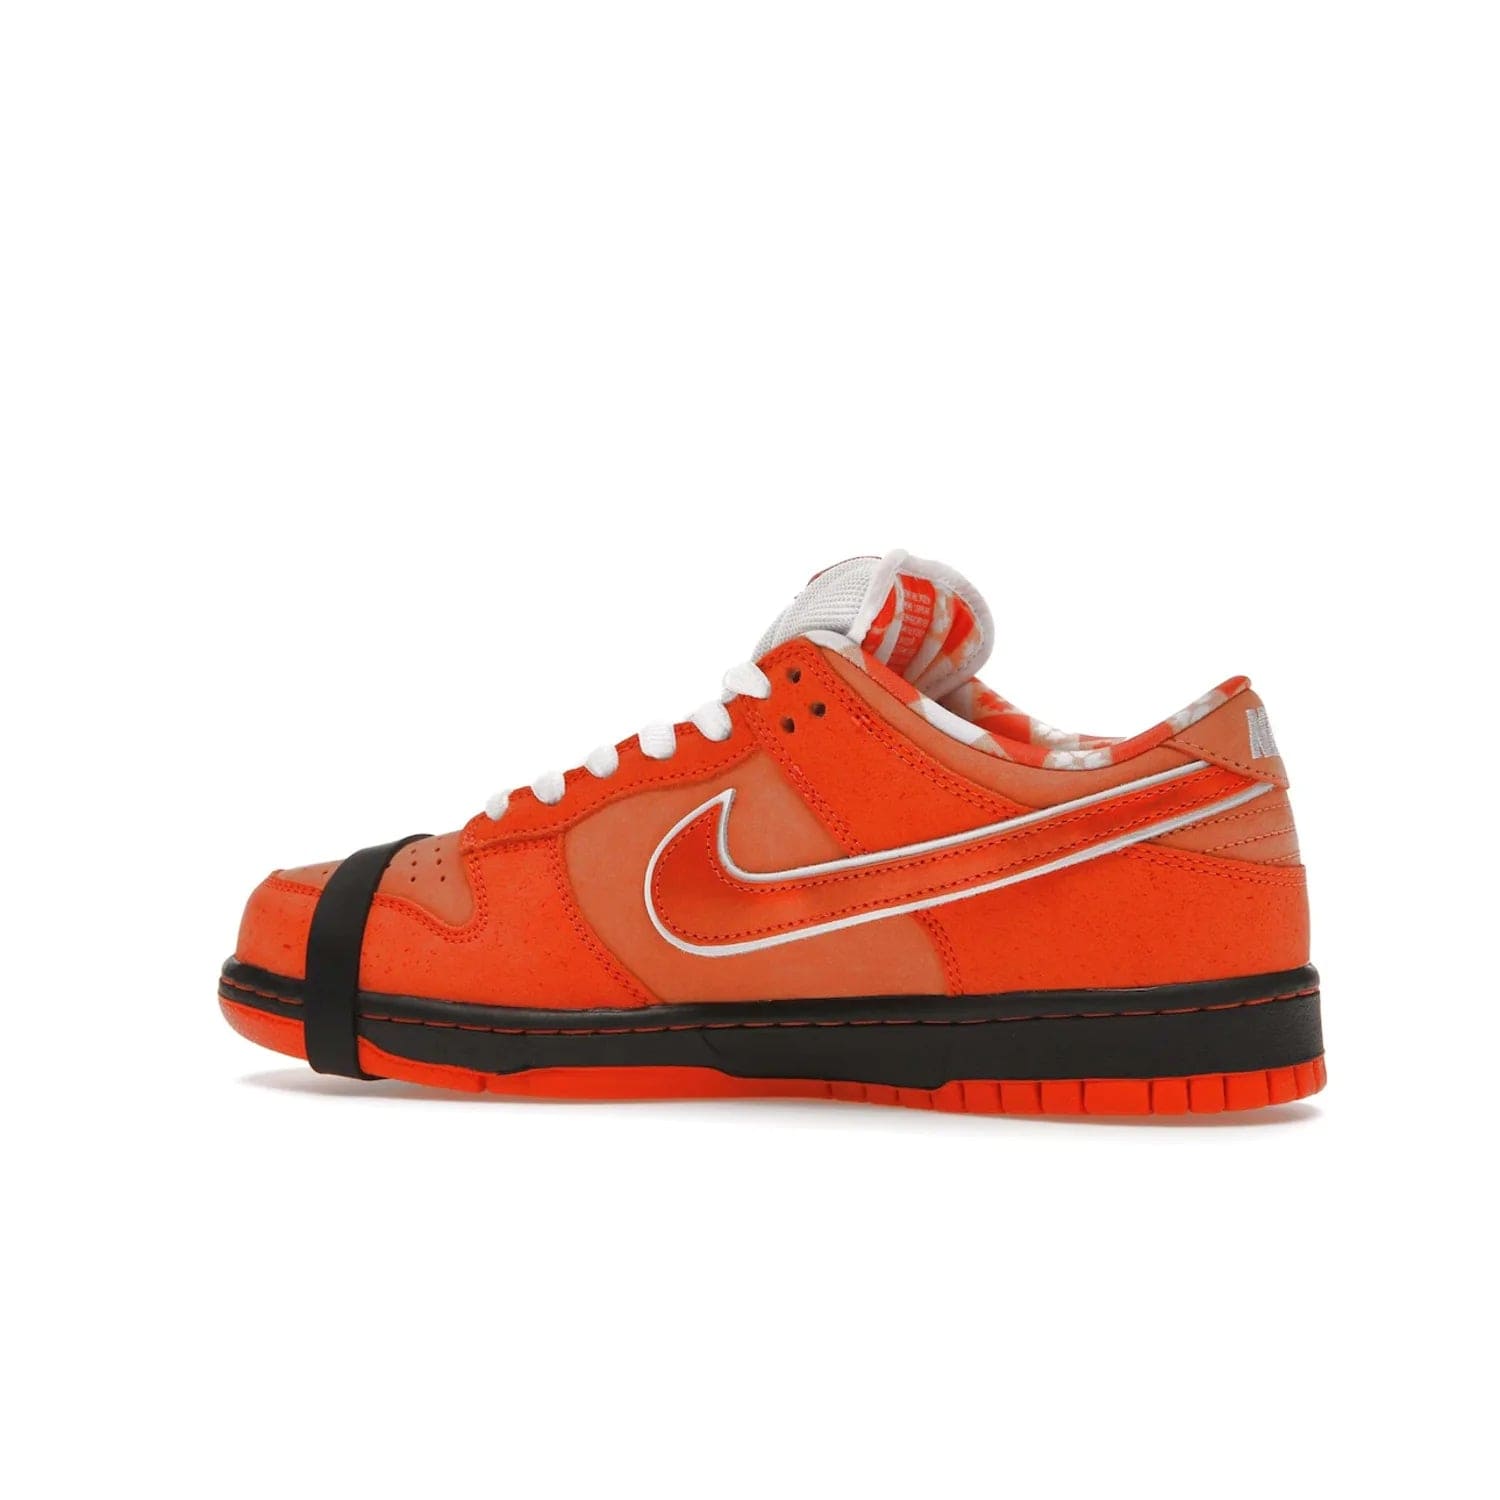 Nike SB Dunk Low Concepts Orange Lobster - Image 21 - Only at www.BallersClubKickz.com - Limited Nike SB Dunk Low Concepts Orange Lobster features premium nubuck upper with vibrant oranges for eye-catching colorblocked design. Signature Nike SB tag and bib-inspired interior for added texture. Outsole and cupsole provide extra reinforcement. Get it 12/20/2022.